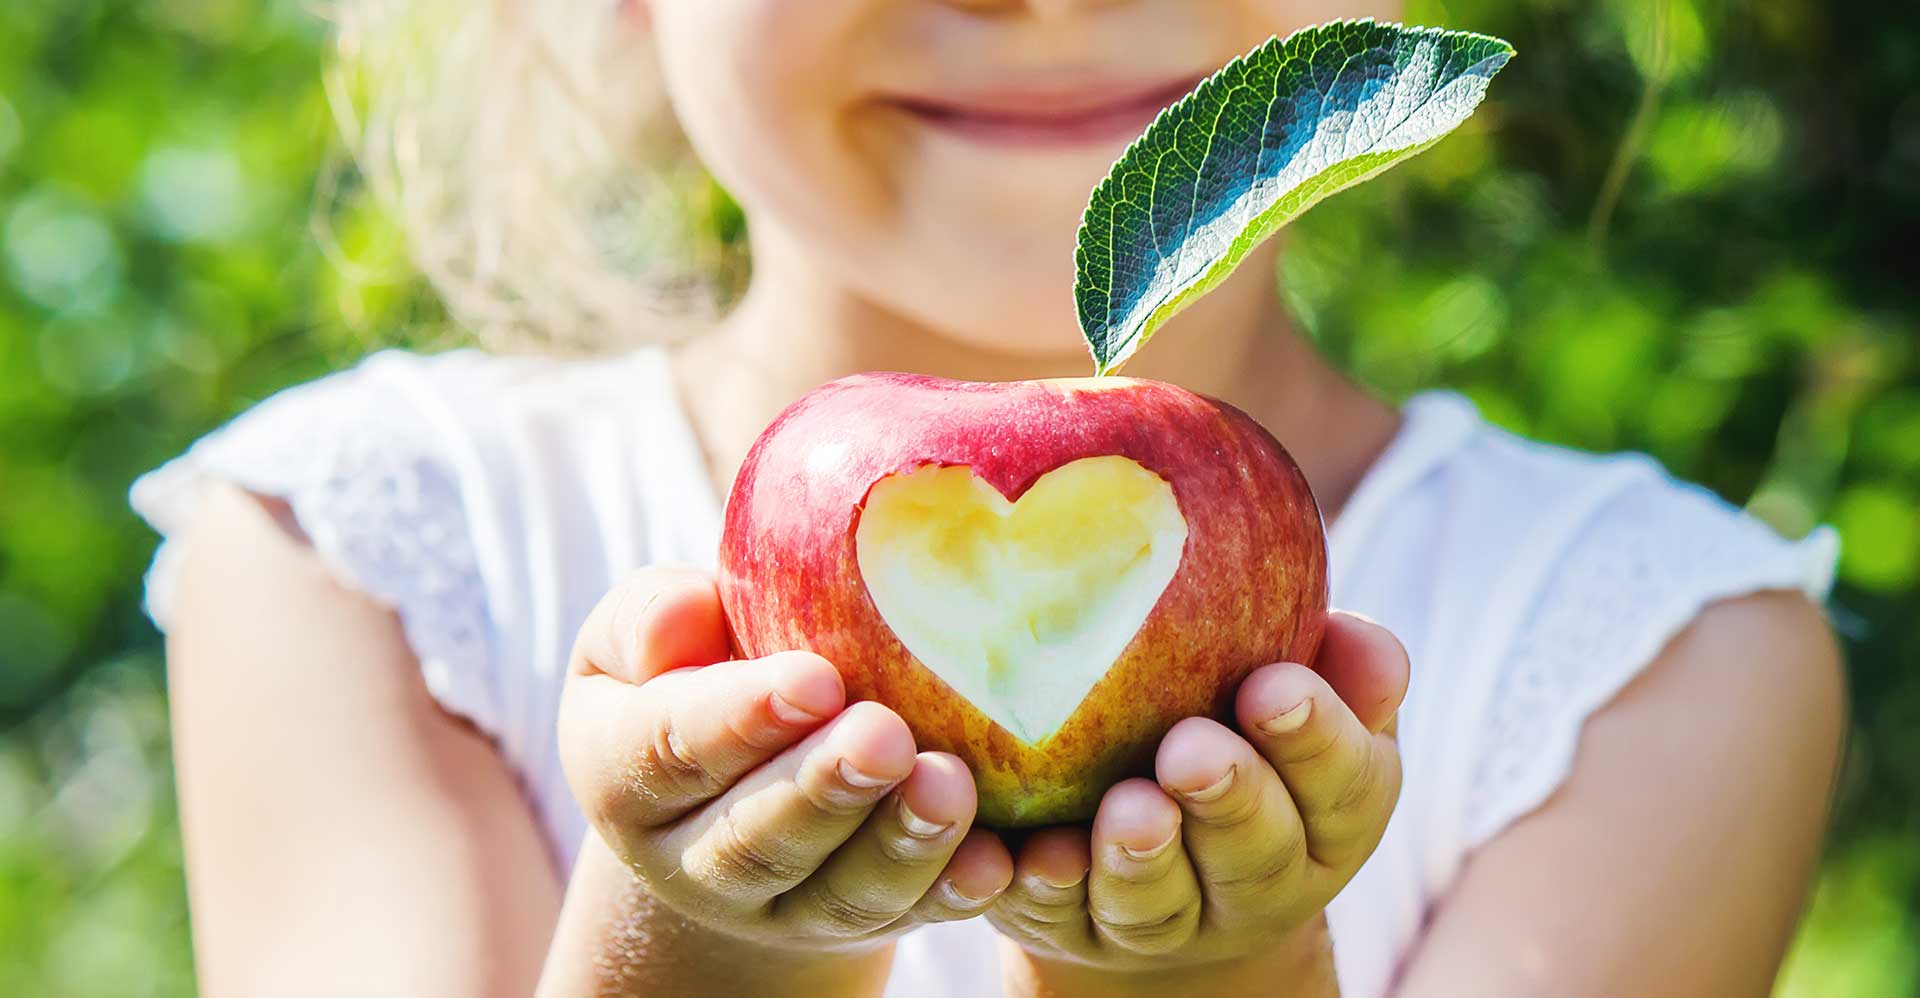 Child holding an apple with heart shape carved into the front.